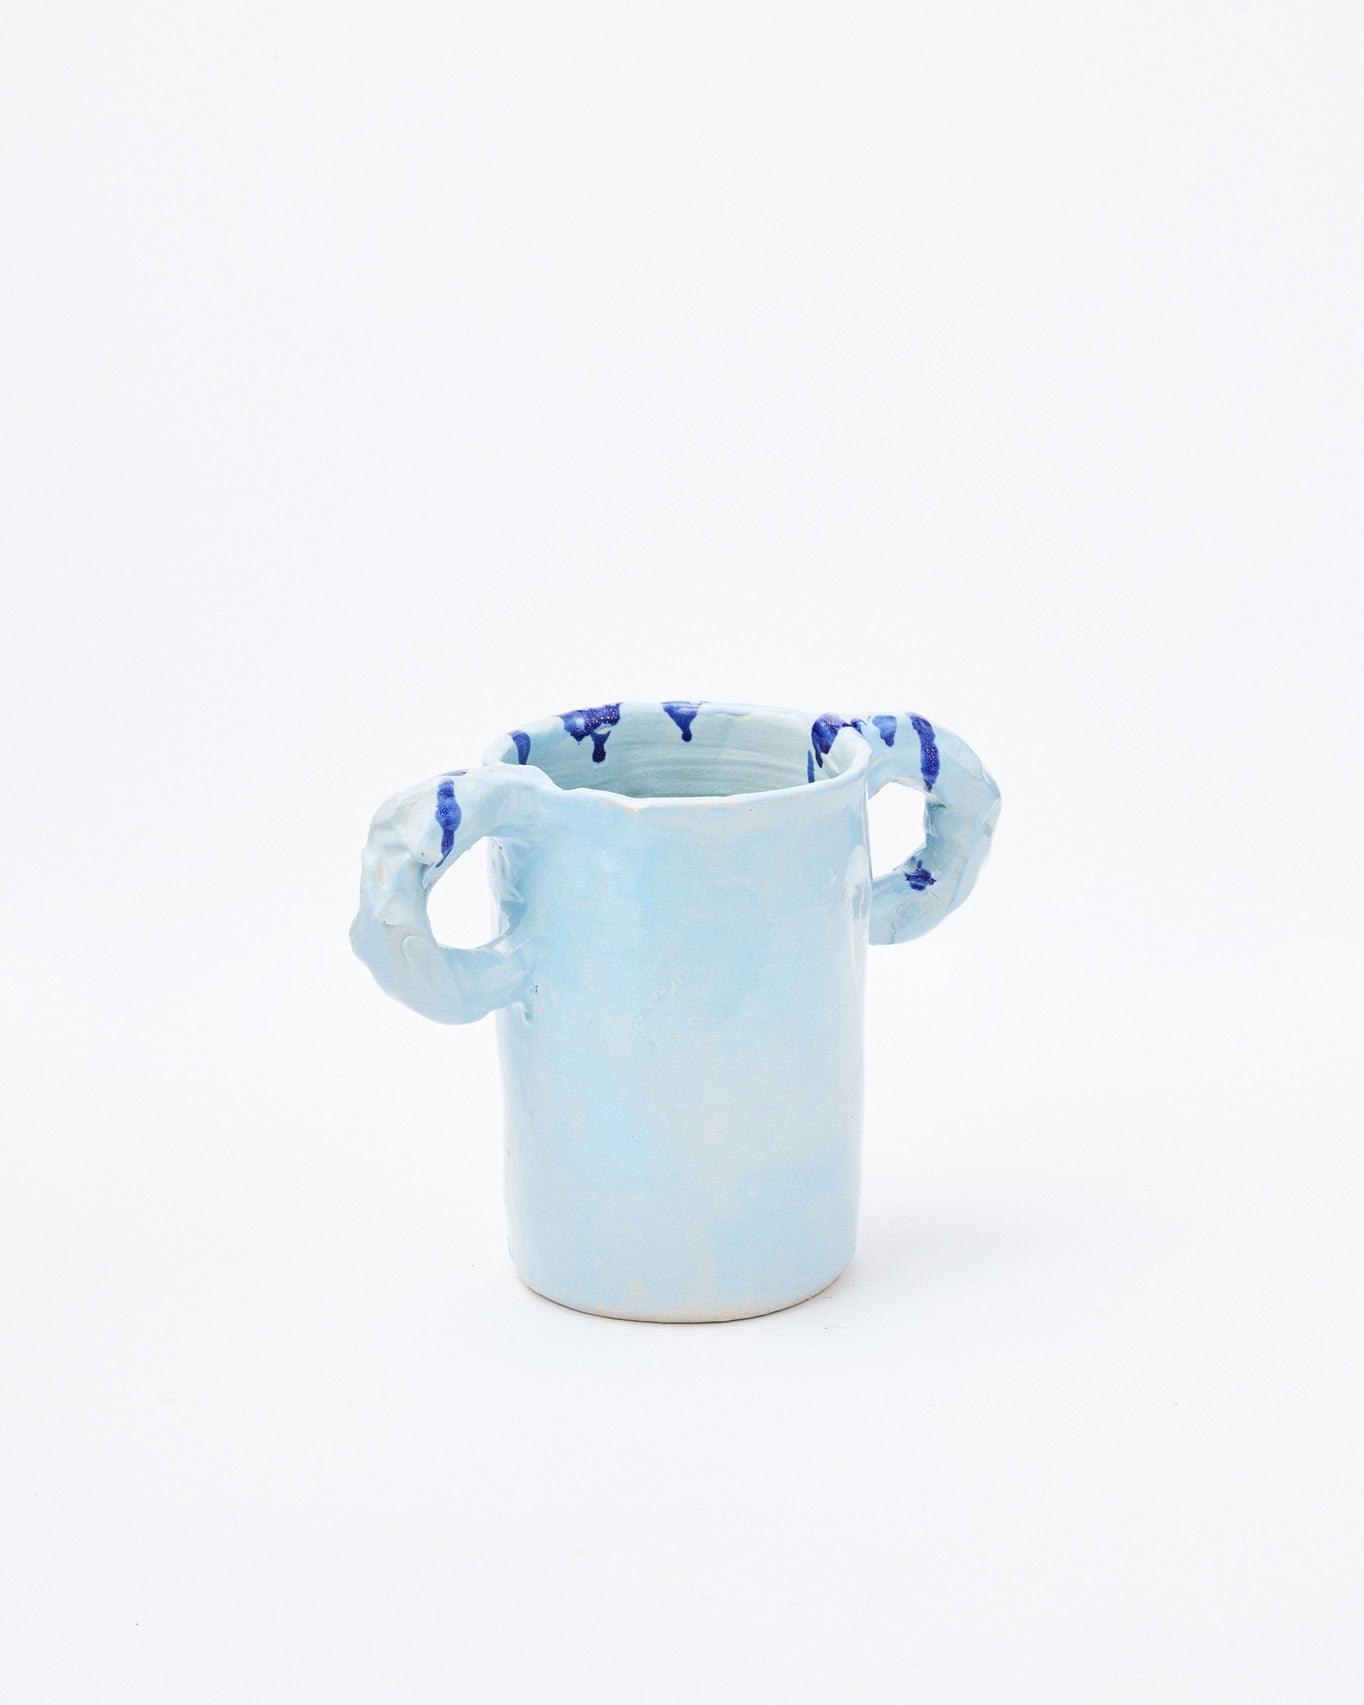 Light blue modern ceramic vase with two handles diagonally positioned on a white background